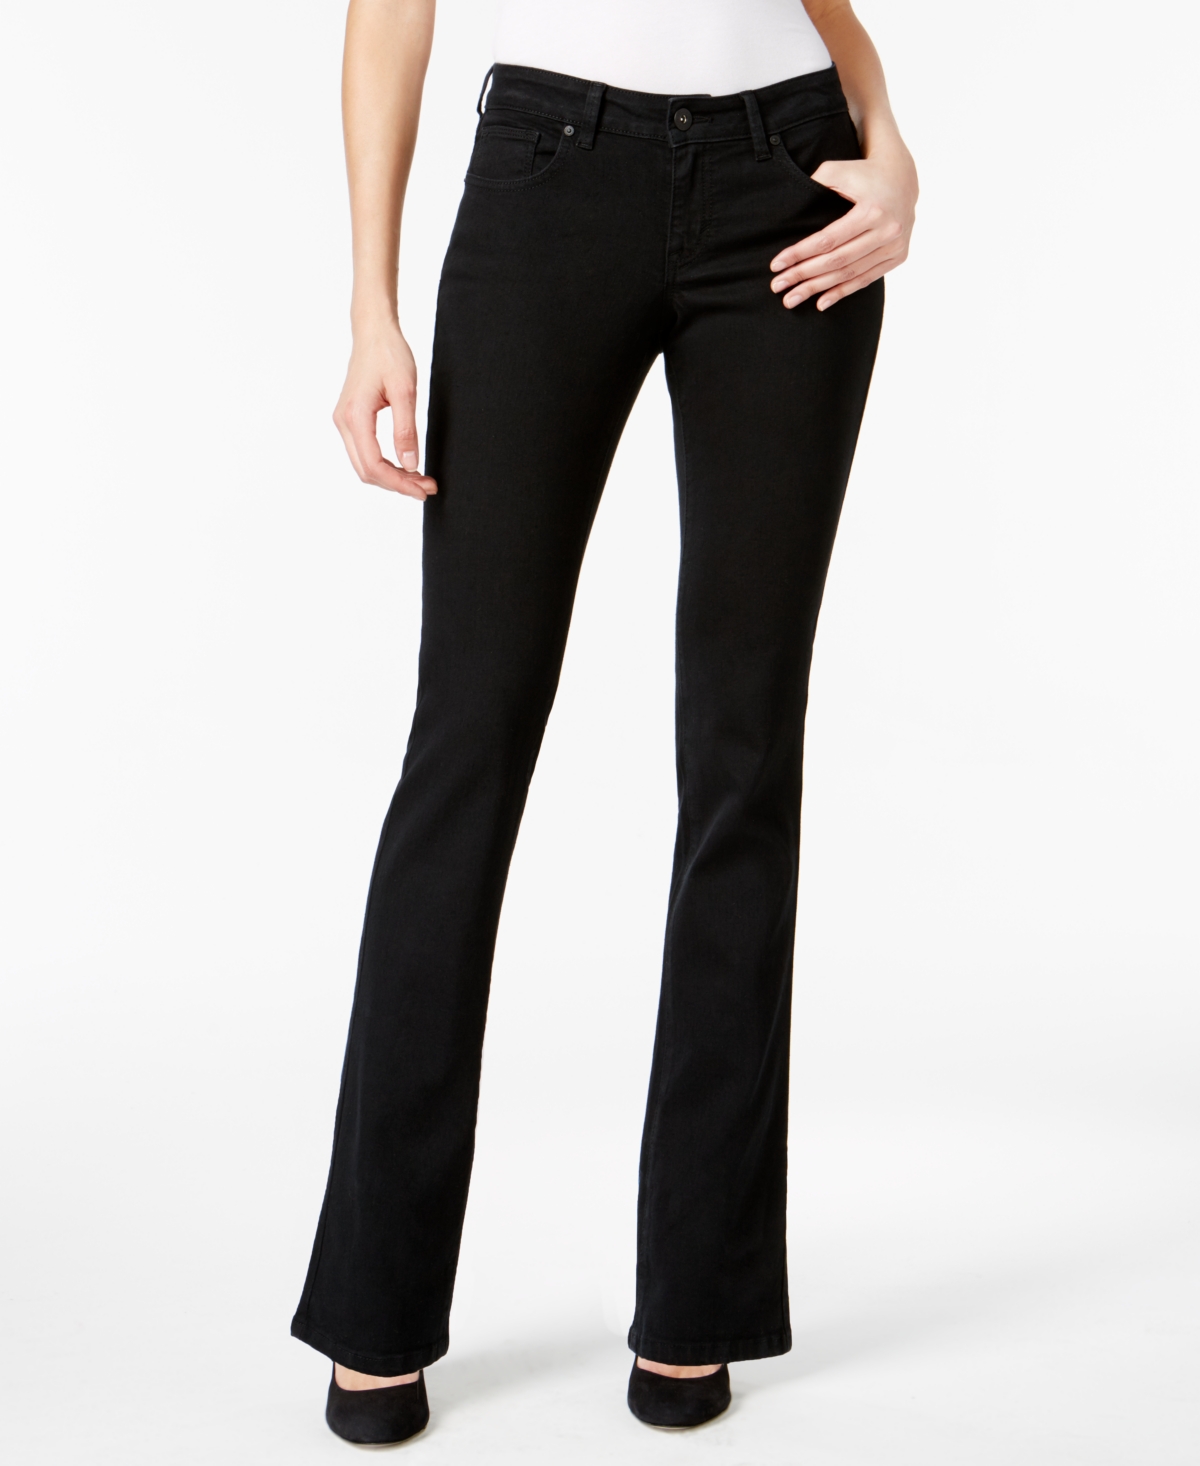 Style & Co Women's Embroidered High-Rise Cuffed Capri Jeans